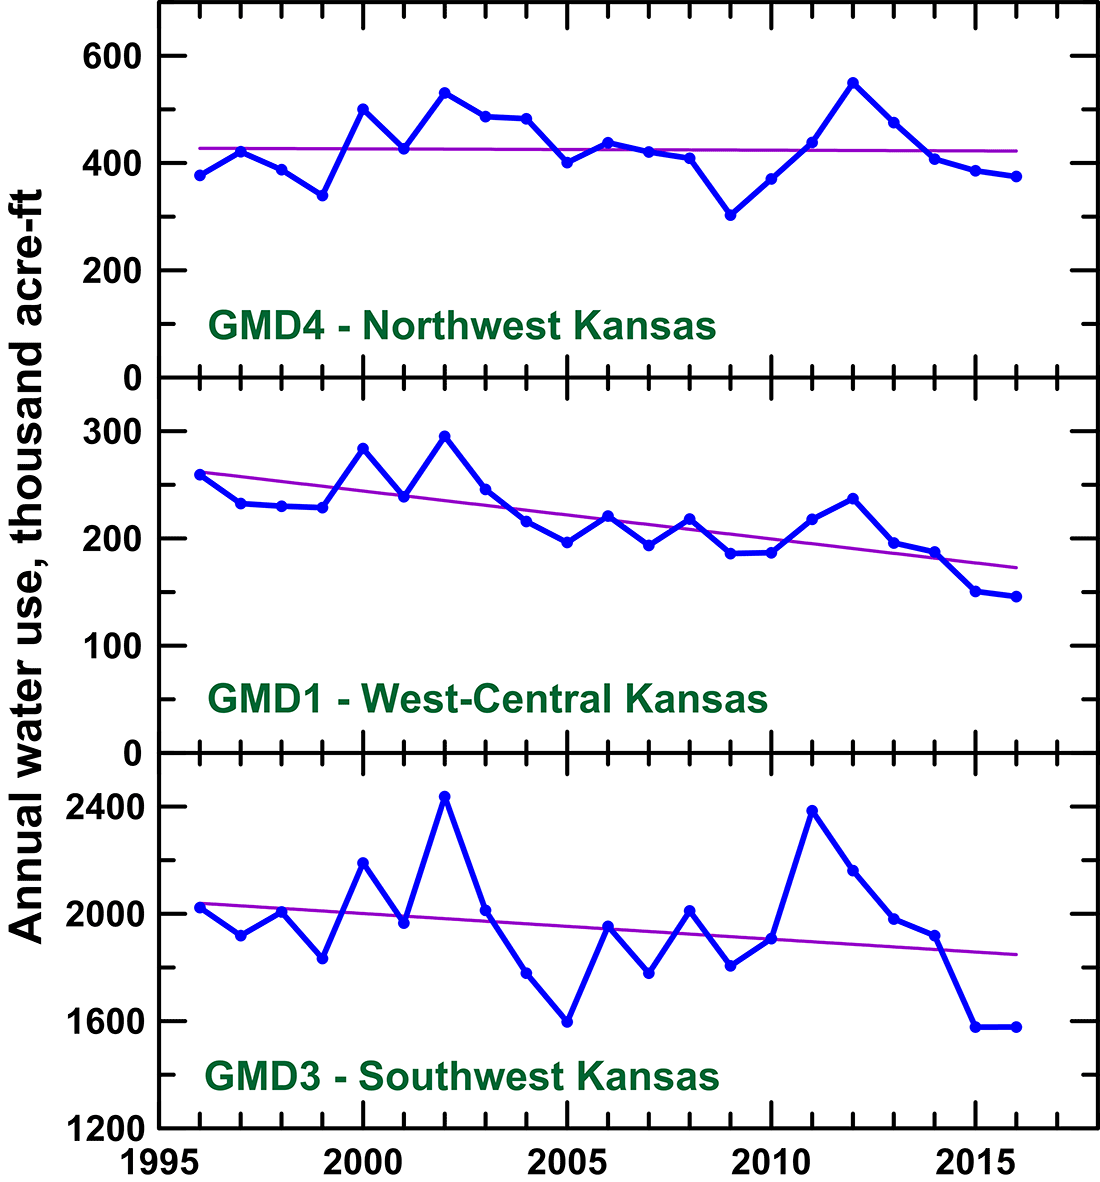 Total annual groundwater use for the three GMDs in the Ogallala region for 1996-2016.